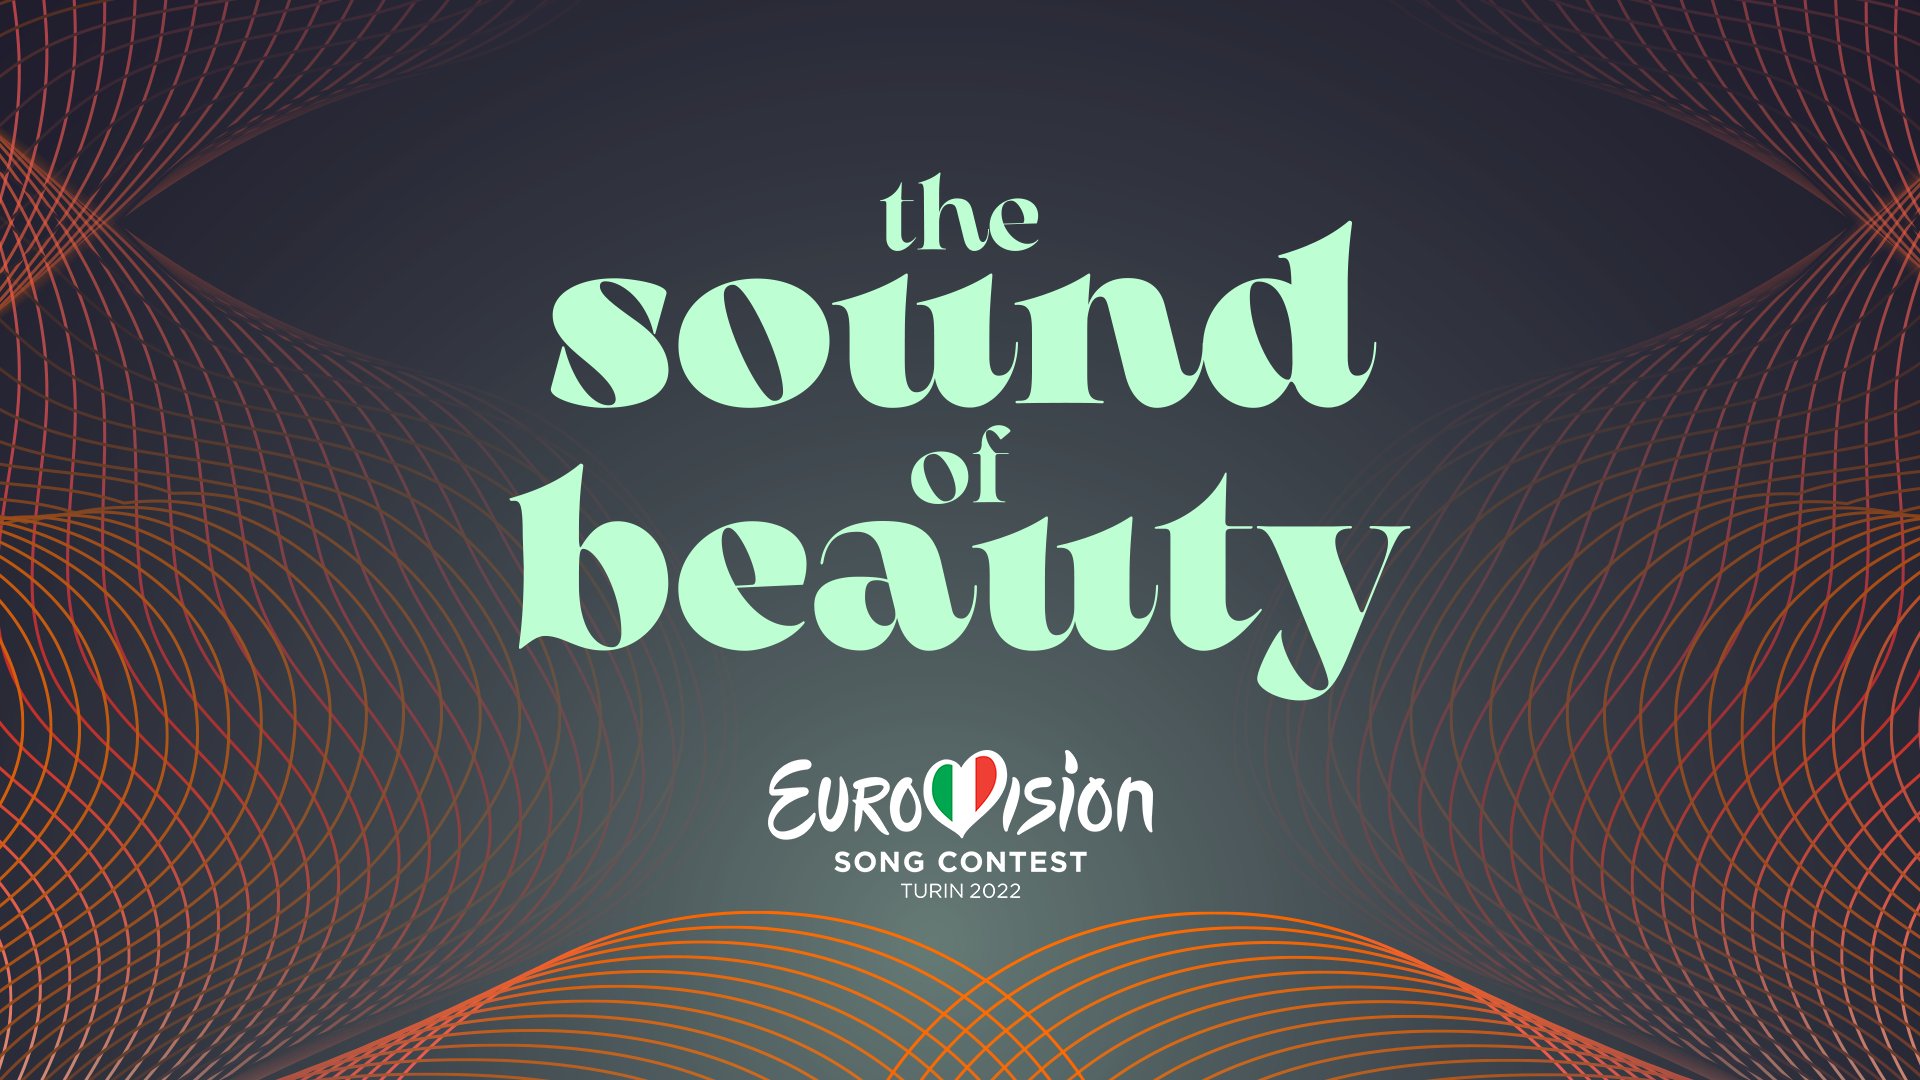 Eurovision Song Contest tuned! More info on the design process and inspiration for this year's #Eurovision logo coming on Monday!